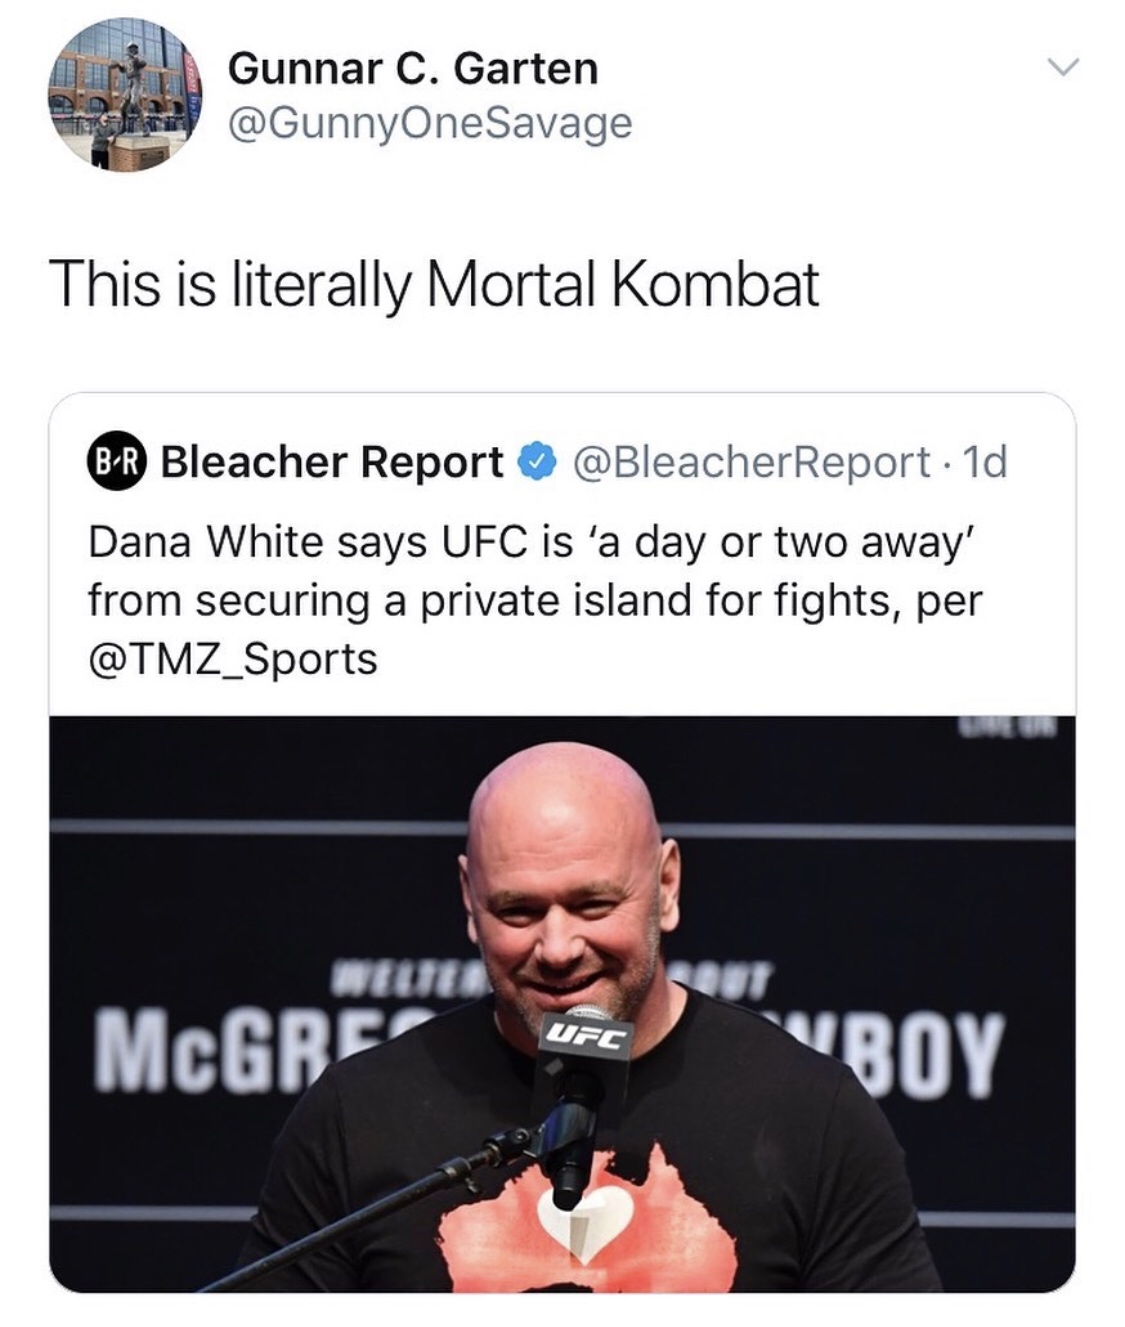 photo caption - Gunnar C. Garten This is literally Mortal Kombat BR Bleacher Report 1d Dana White says Ufc is 'a day or two away' from securing a private island for fights, per Neitti Ufc Mcgre Boy